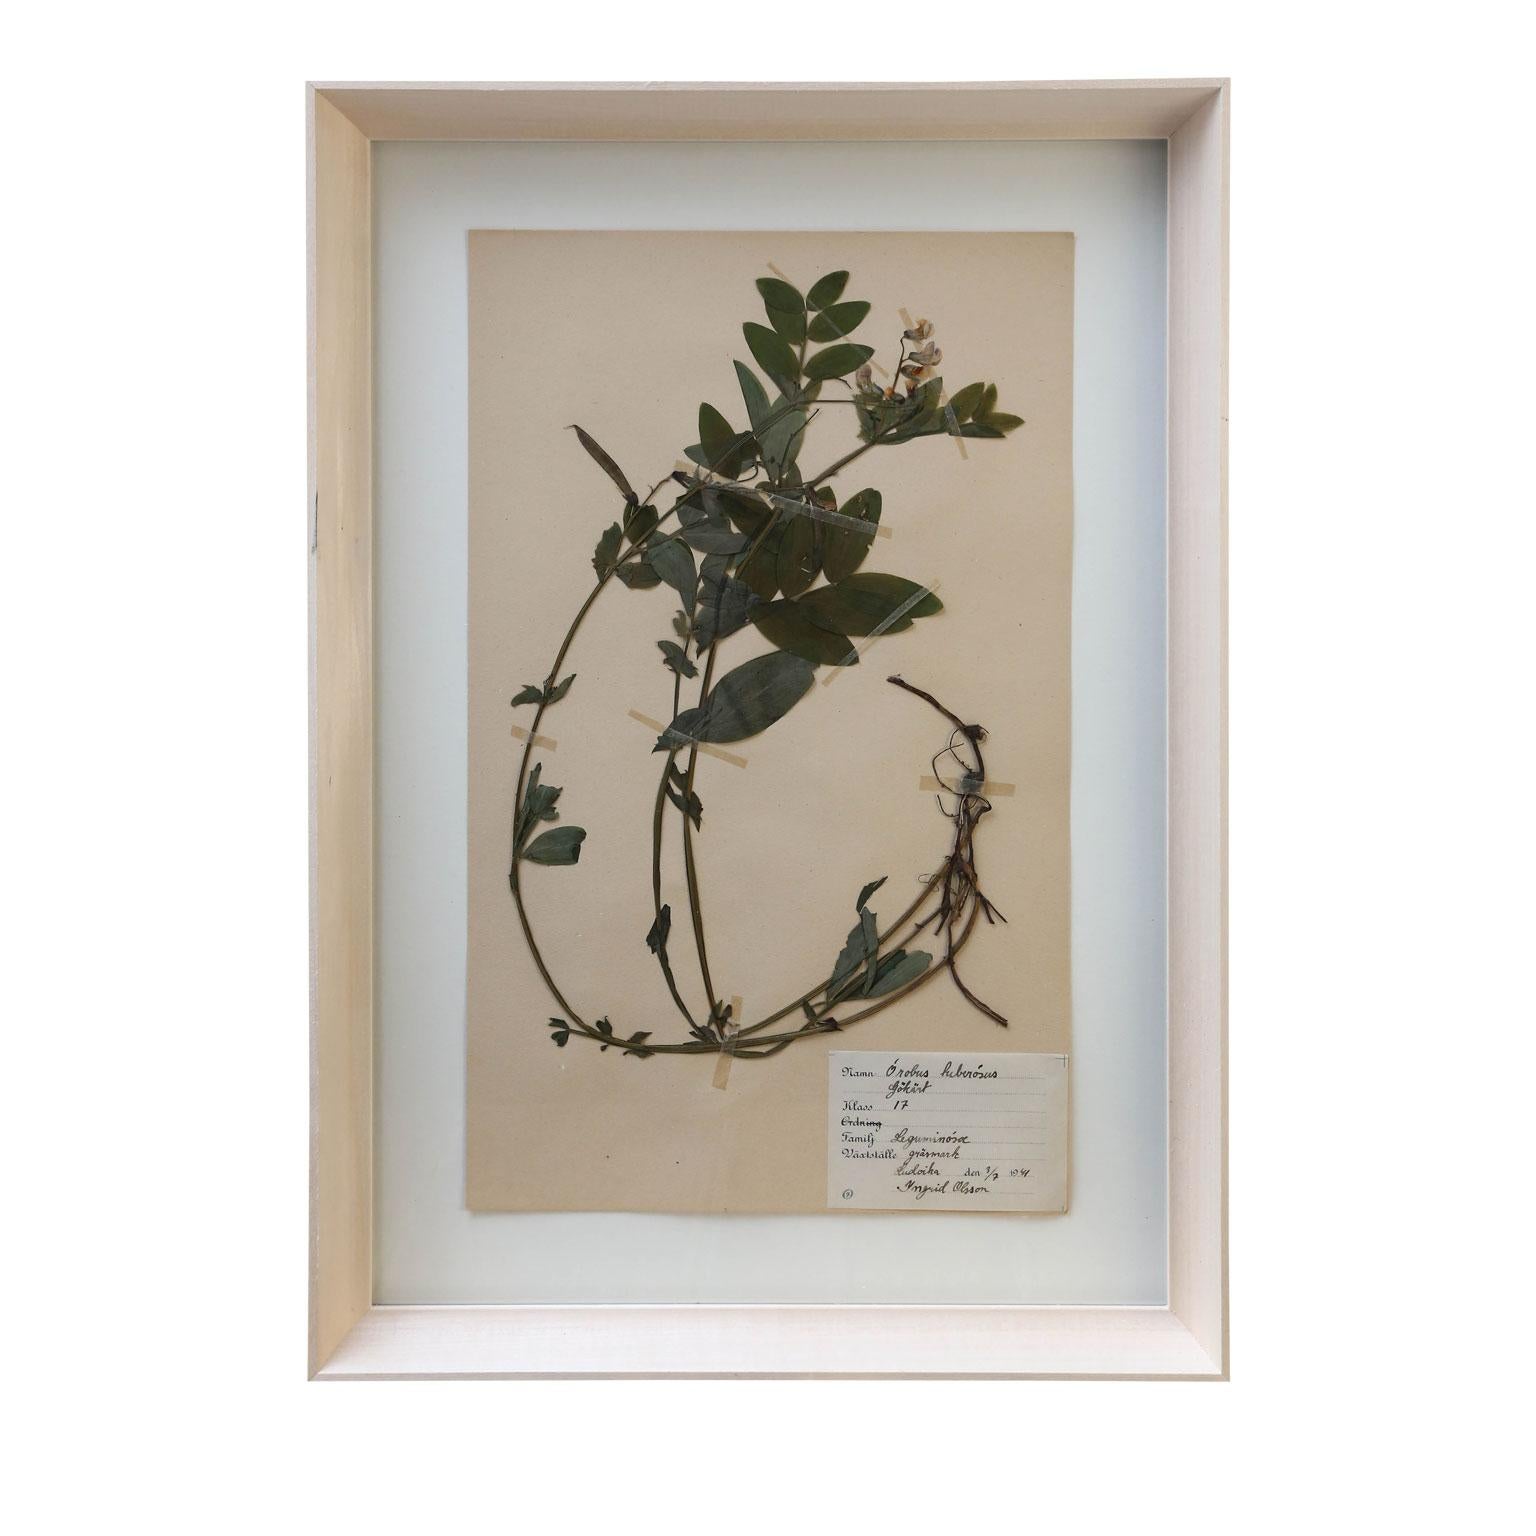 Vintage Swedish herbaria, newly framed in unfinished maple, (circa 1930-1950). Each float-mounted herbarium (botanical) measures: 15.75 inches high x 9.5 inches wide. Sold individually and priced $695 each. Twenty available - see all five listings